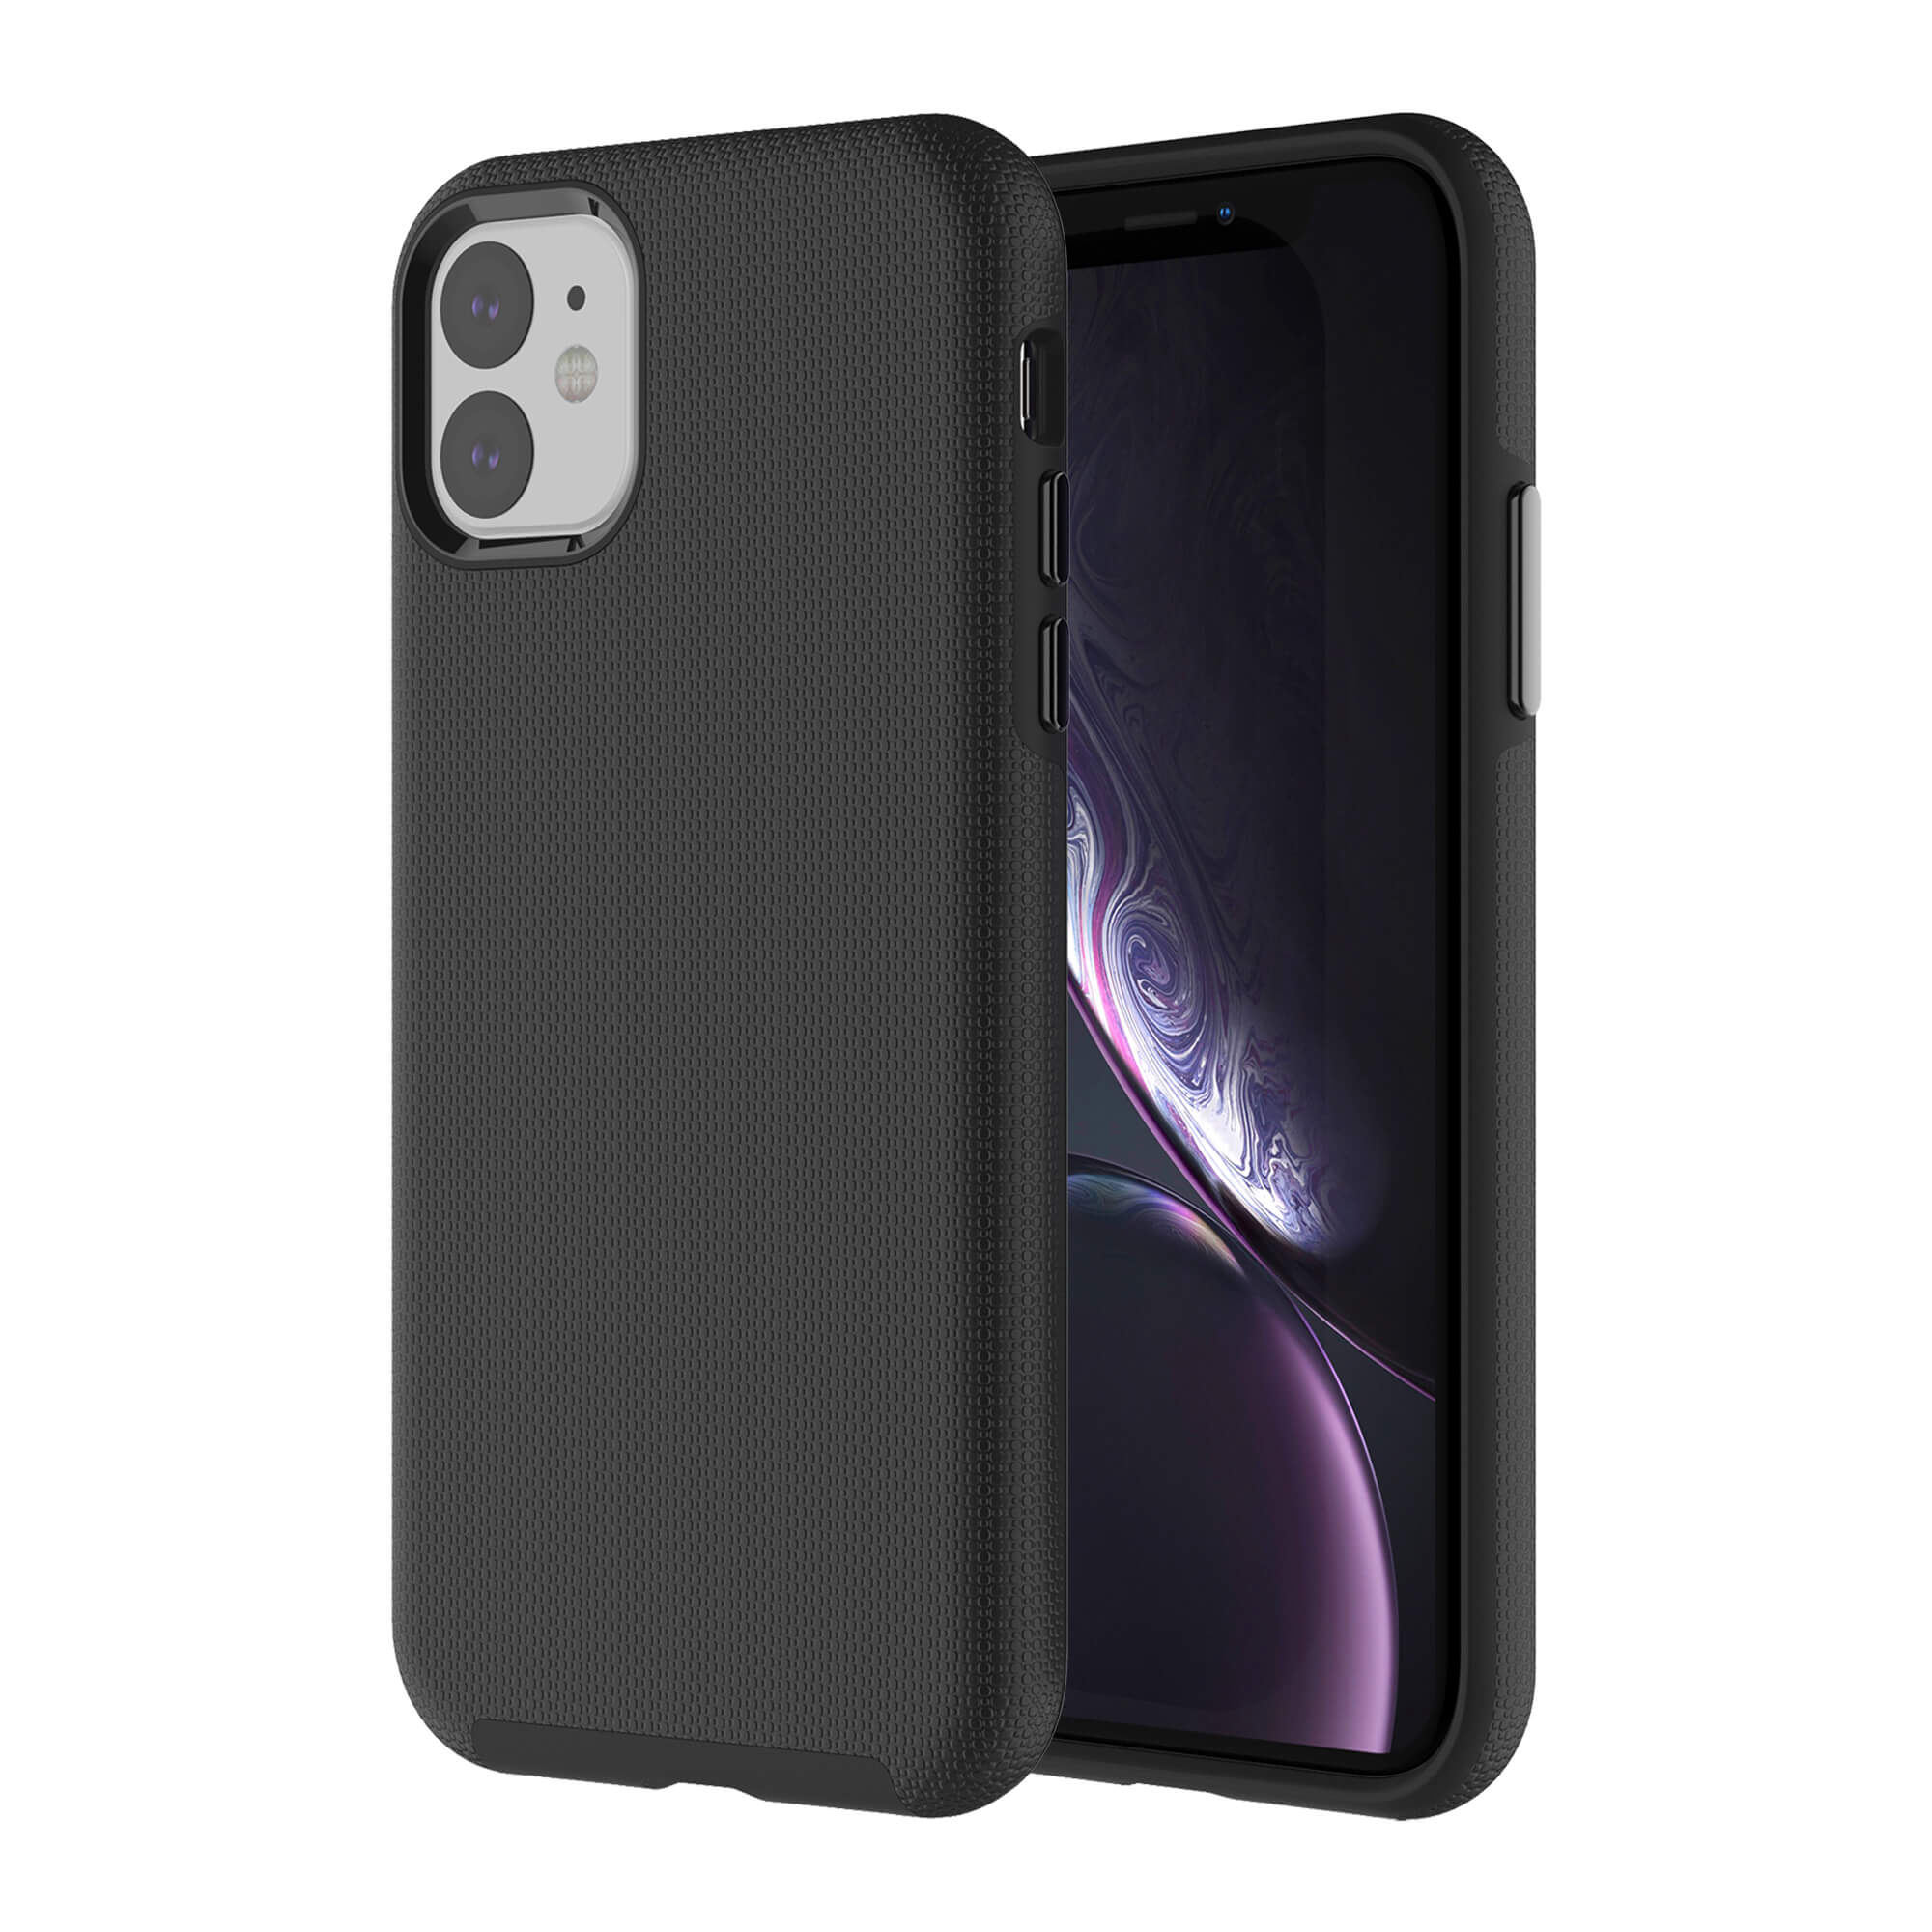 Axessorize PROTech case for iPhone XR/11 - Black